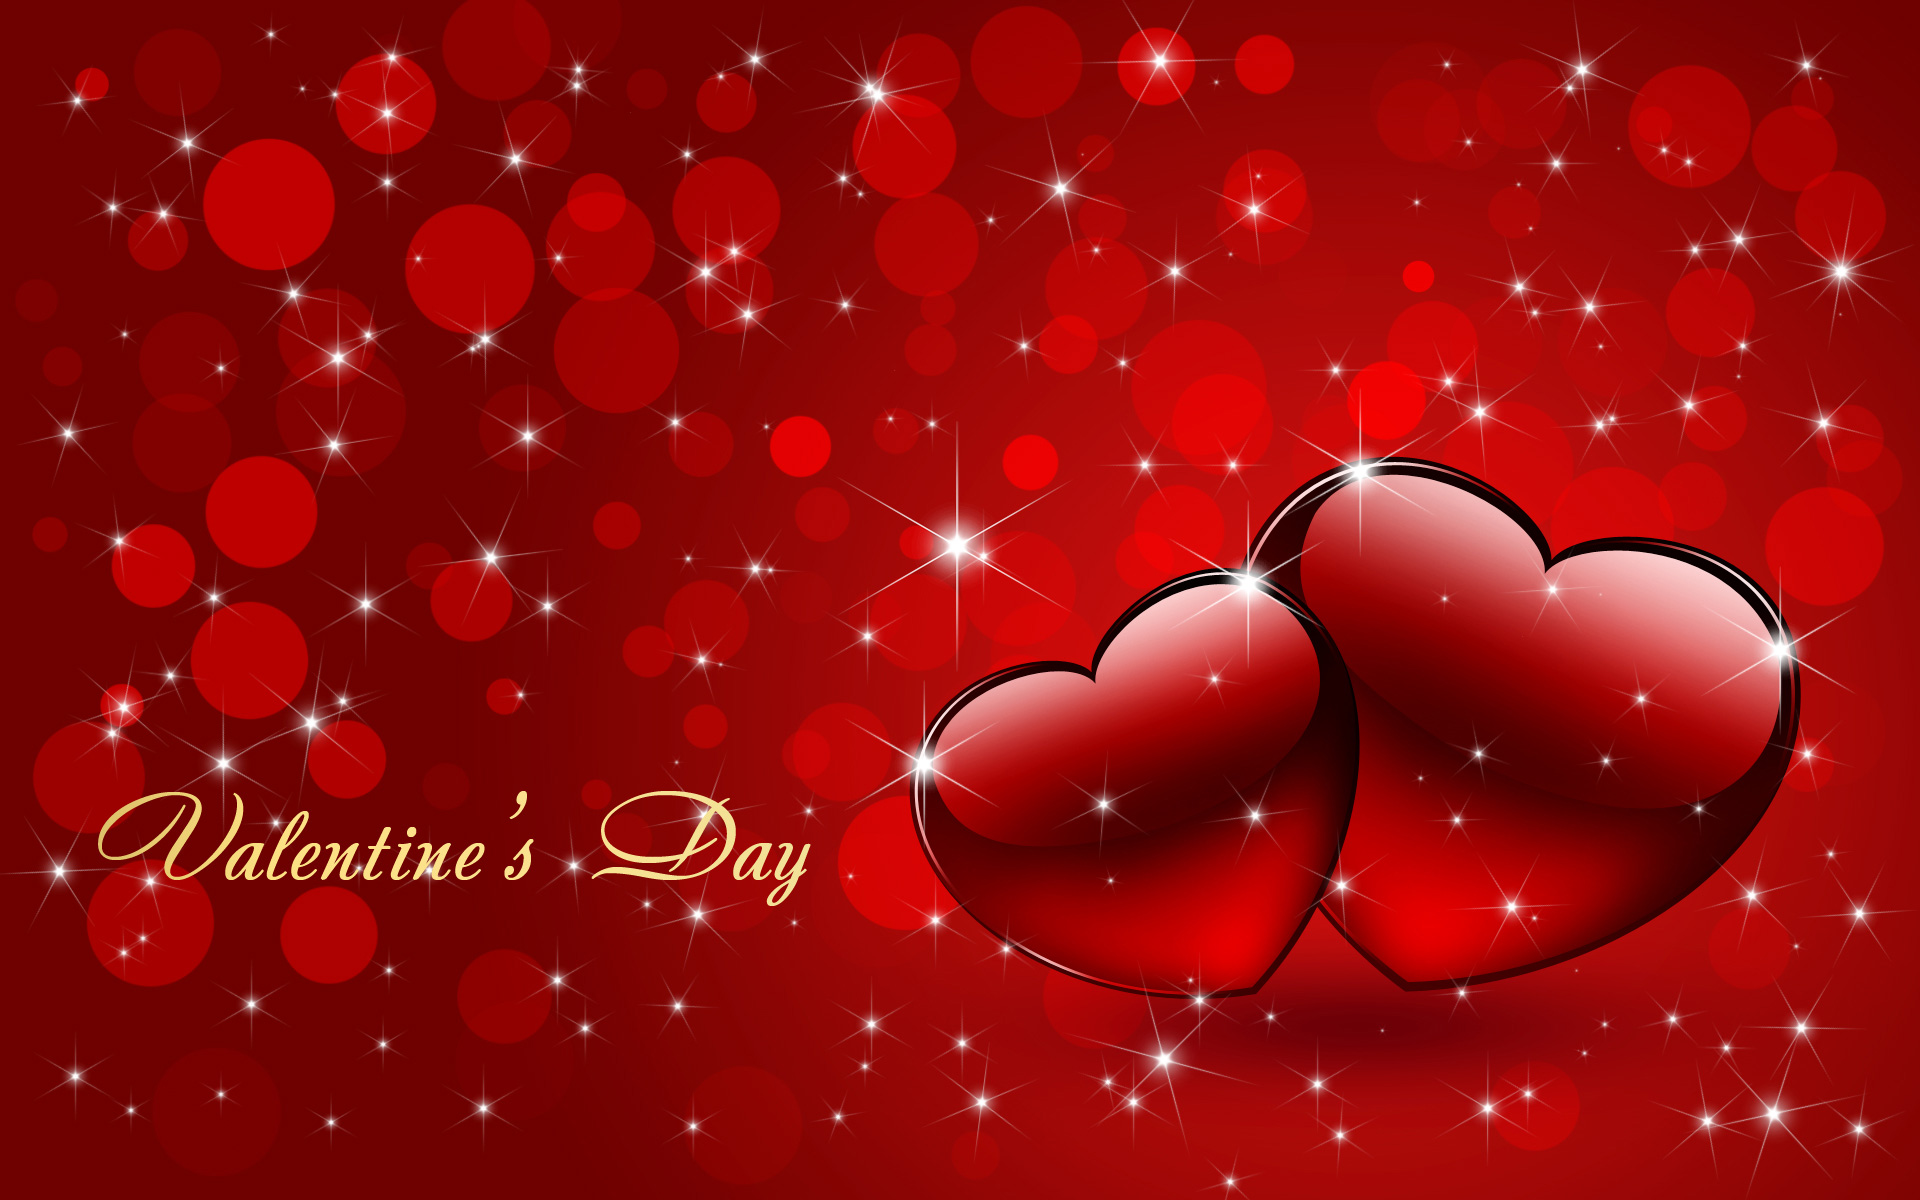 How to create Festive Background for Valentine’s Day with Abstract Hearts i...